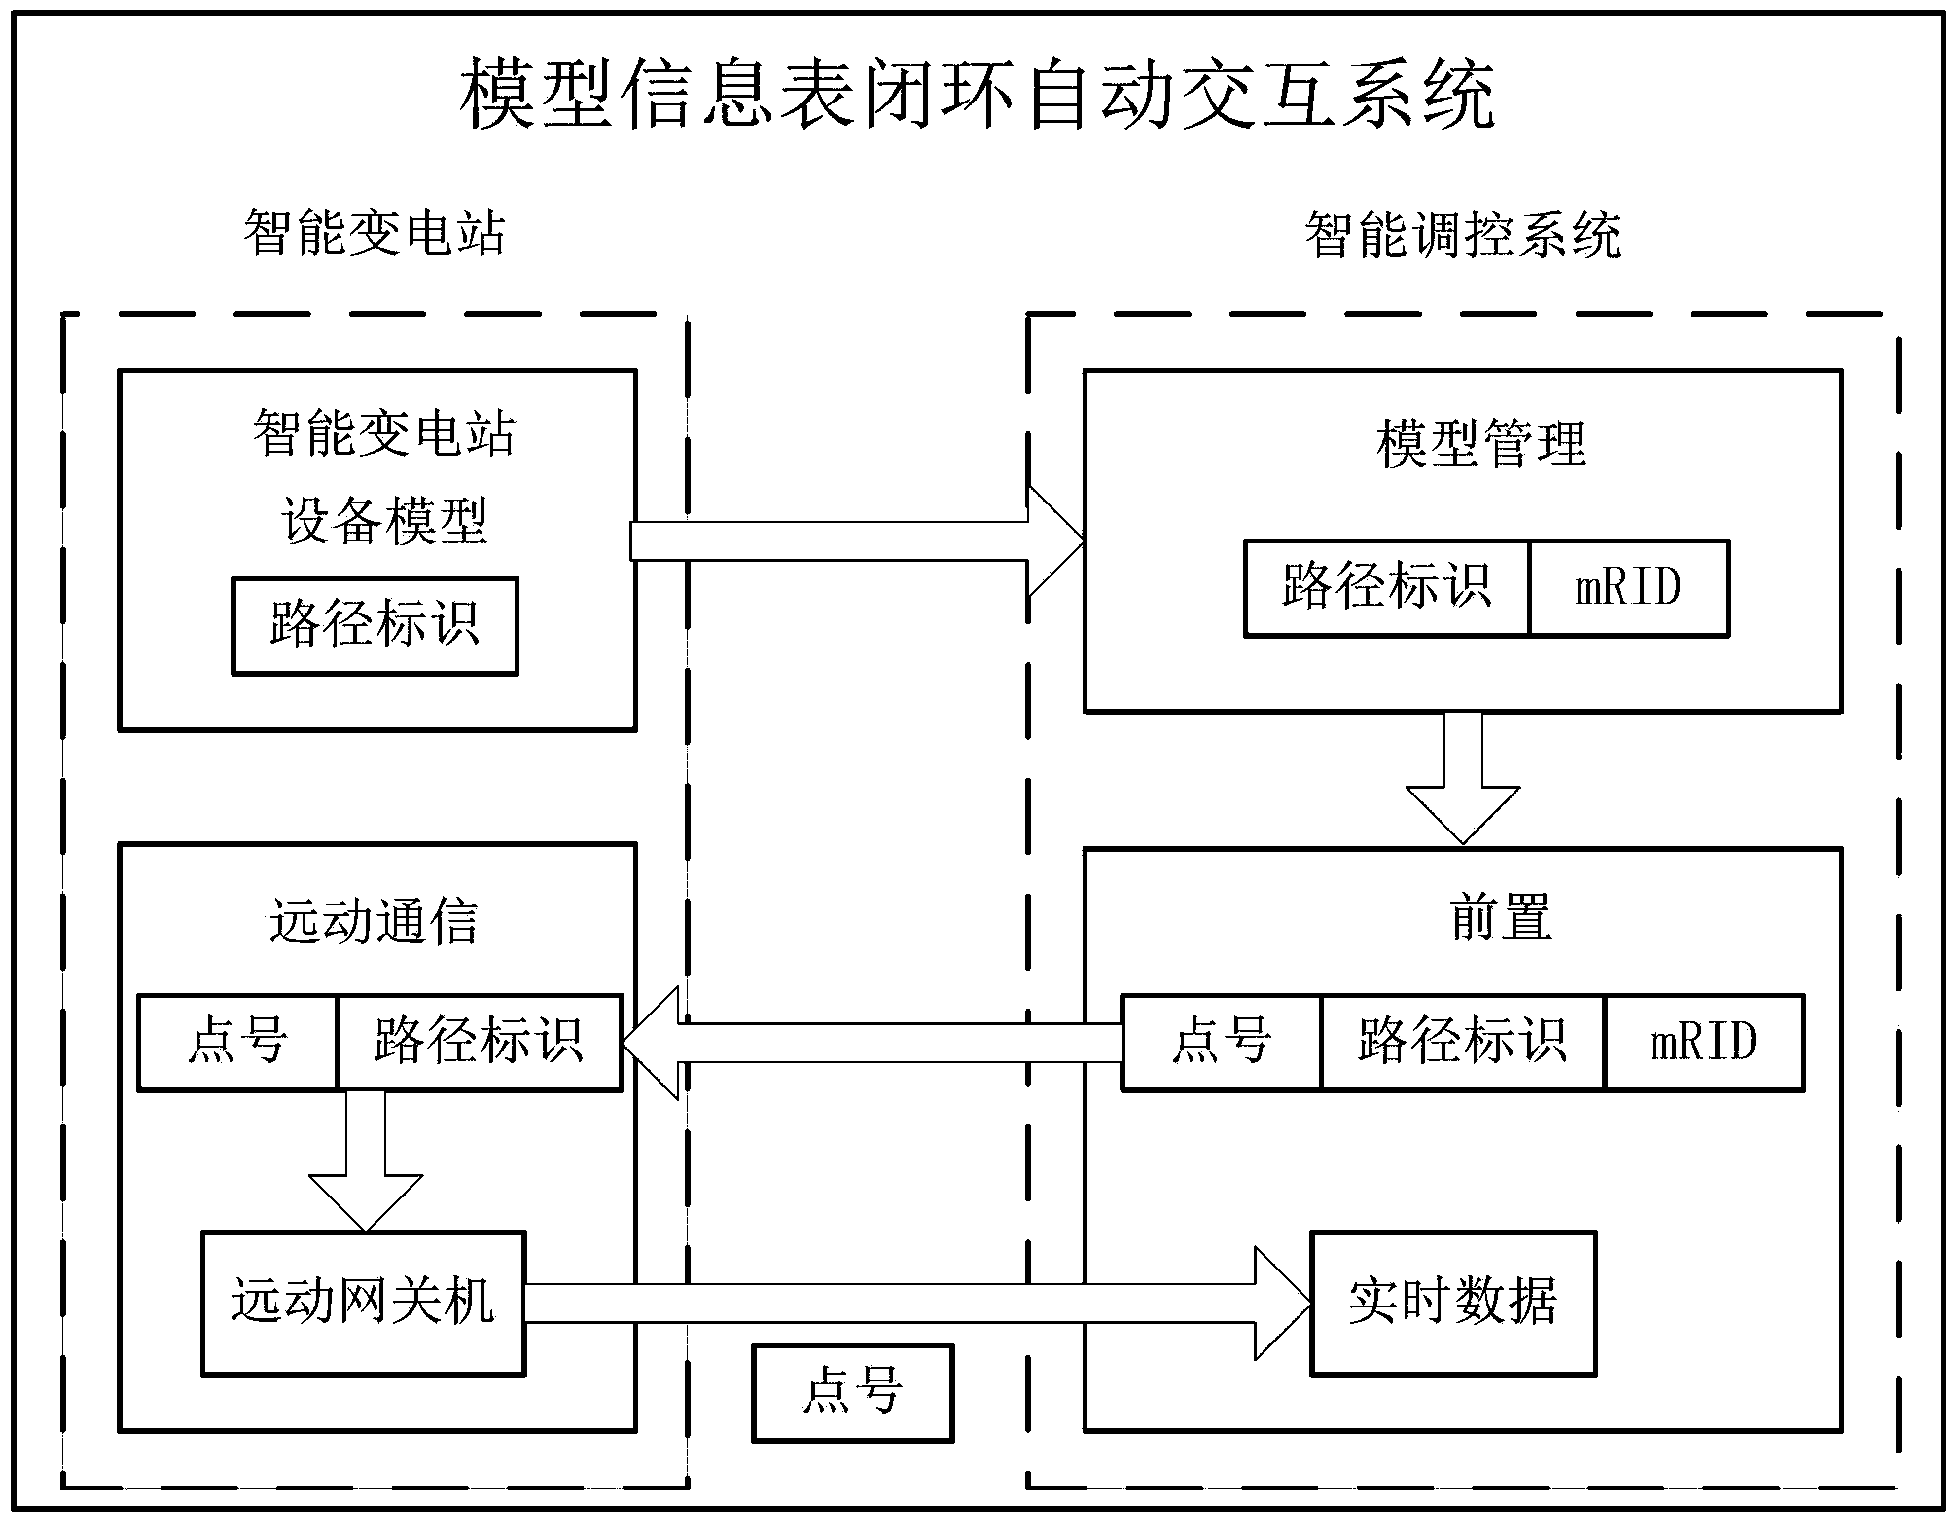 Information table template based closed-loop automatic interaction model information table design method